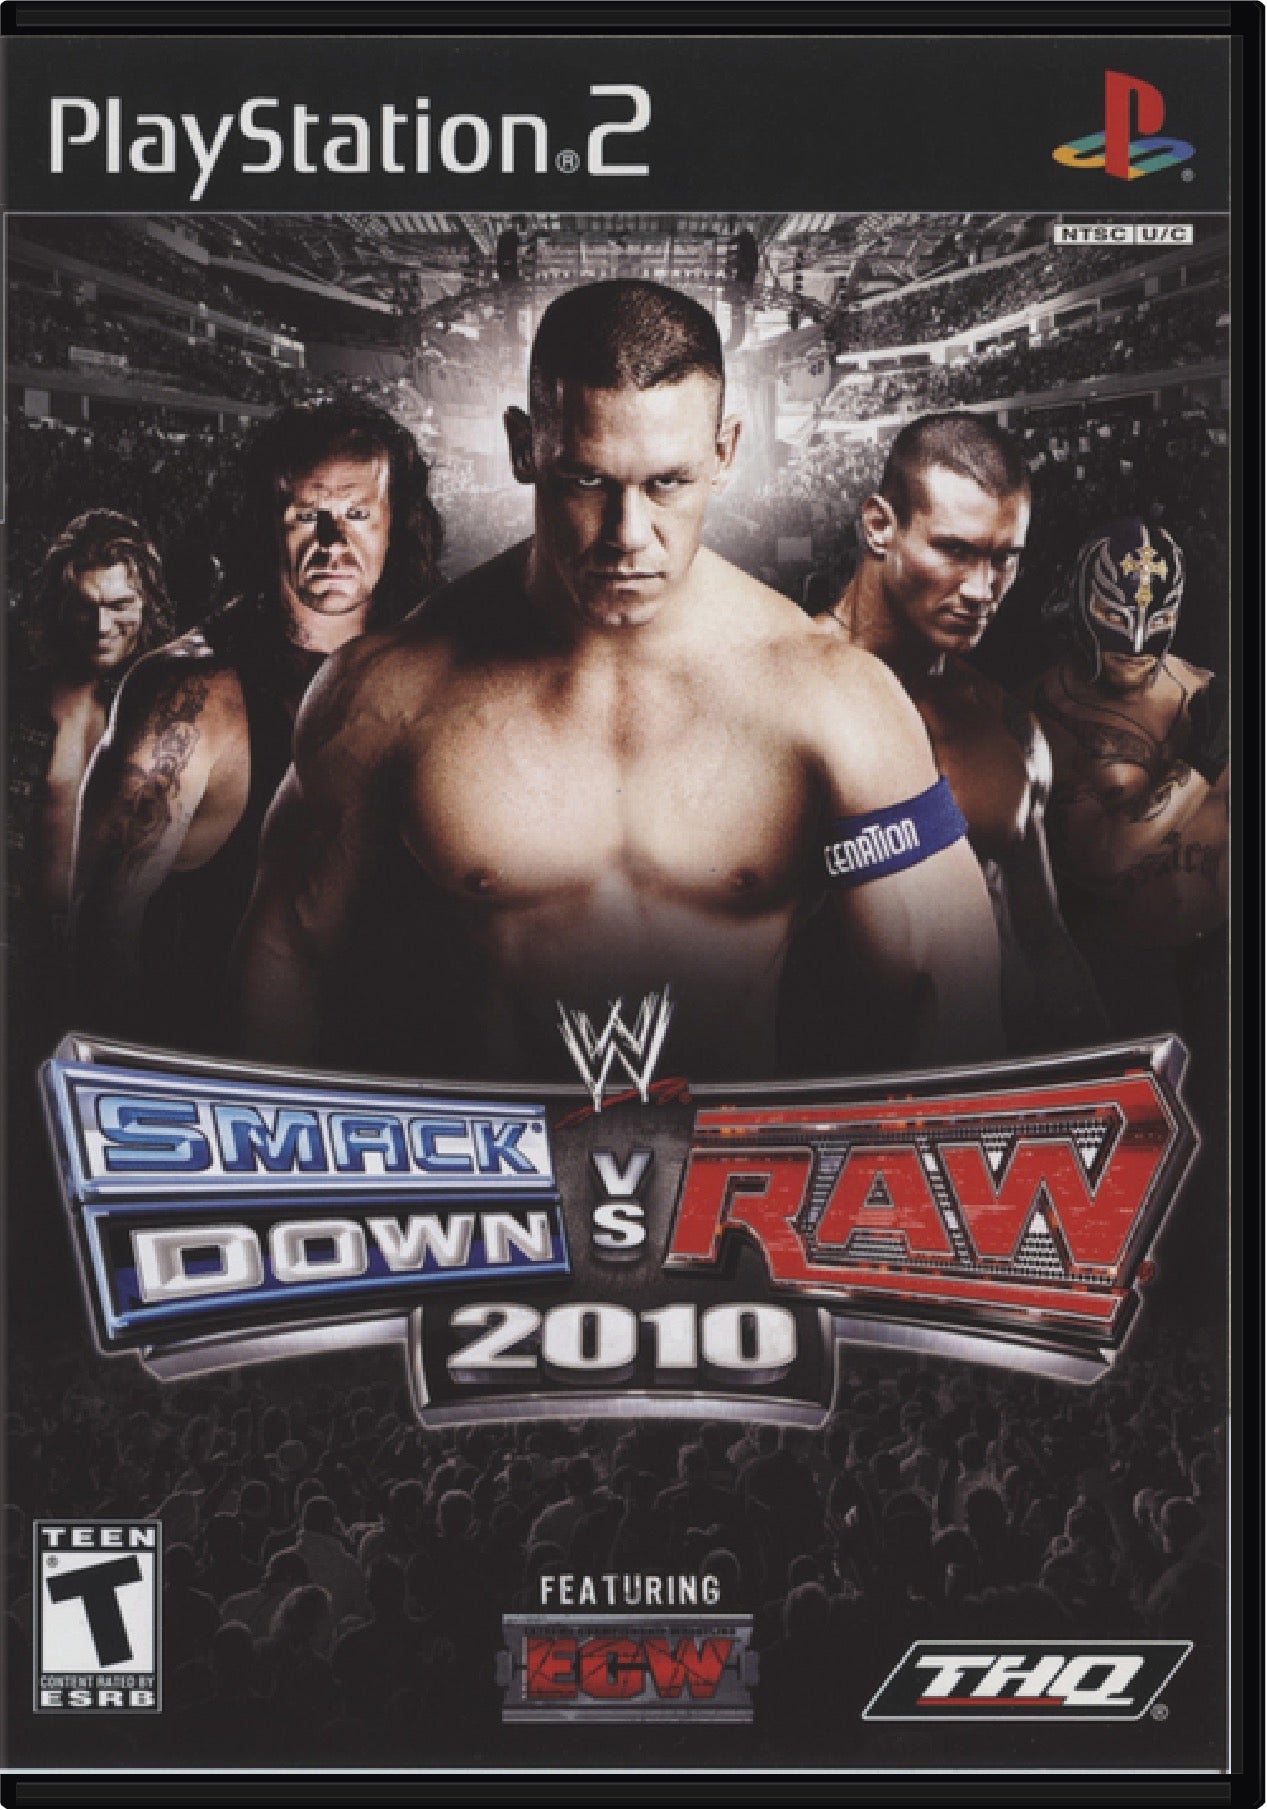 WWE Smackdown vs Raw 2010 Cover Art and Product Photo